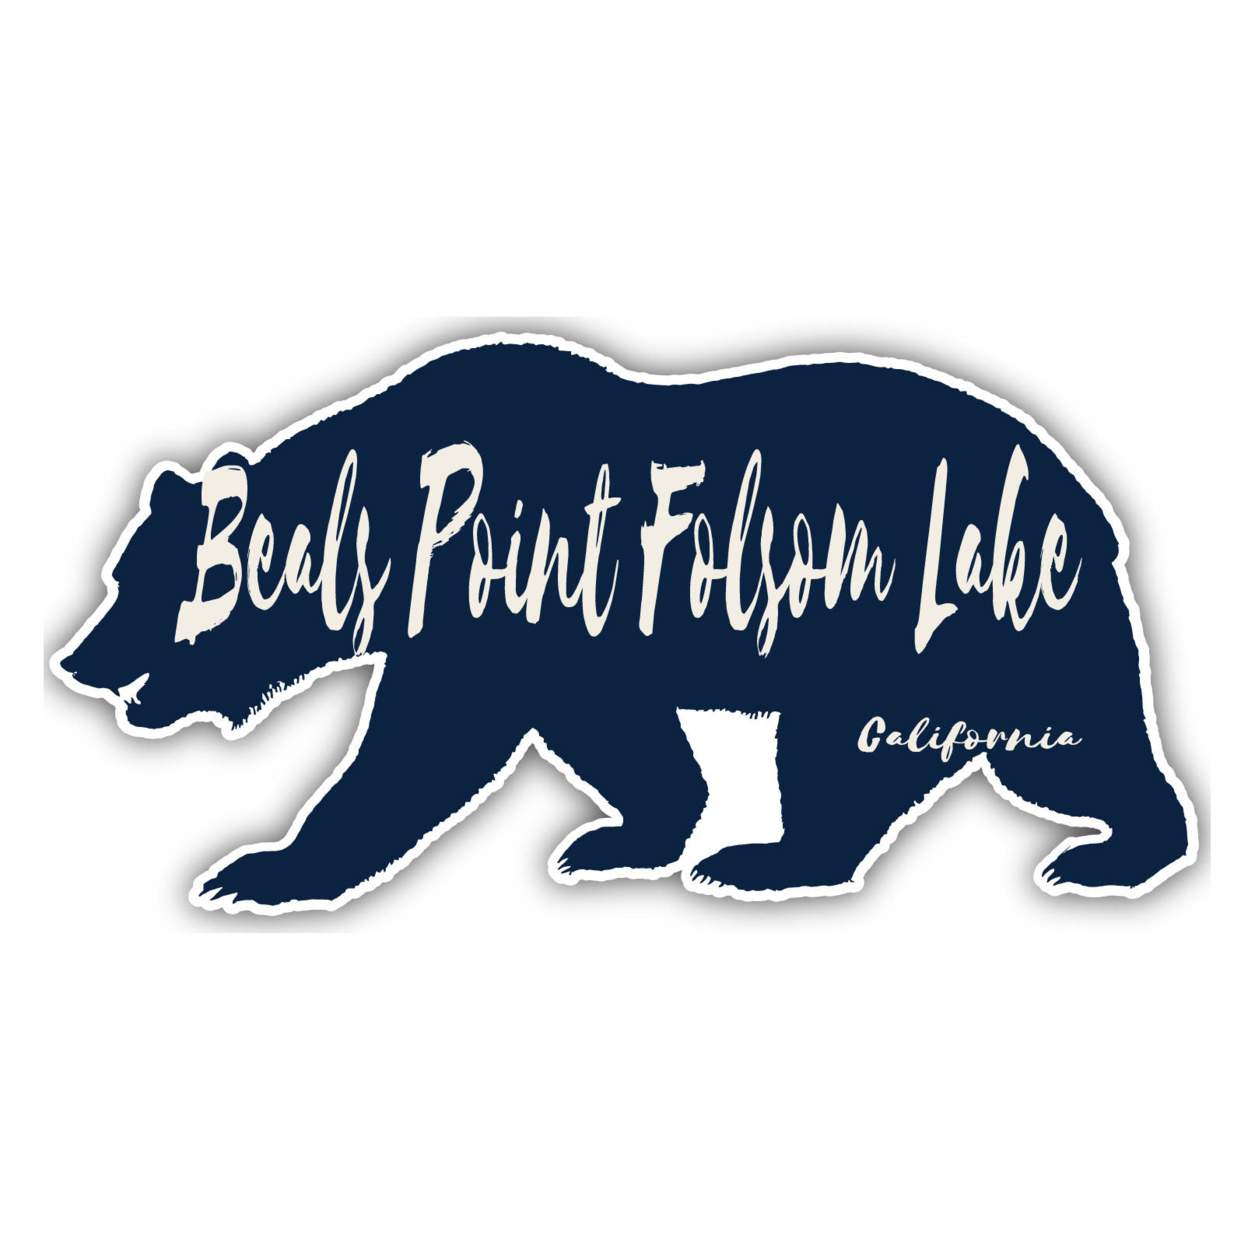 Beals Point Folsom Lake California Souvenir Decorative Stickers (Choose Theme And Size) - 4-Pack, 12-Inch, Camp Life